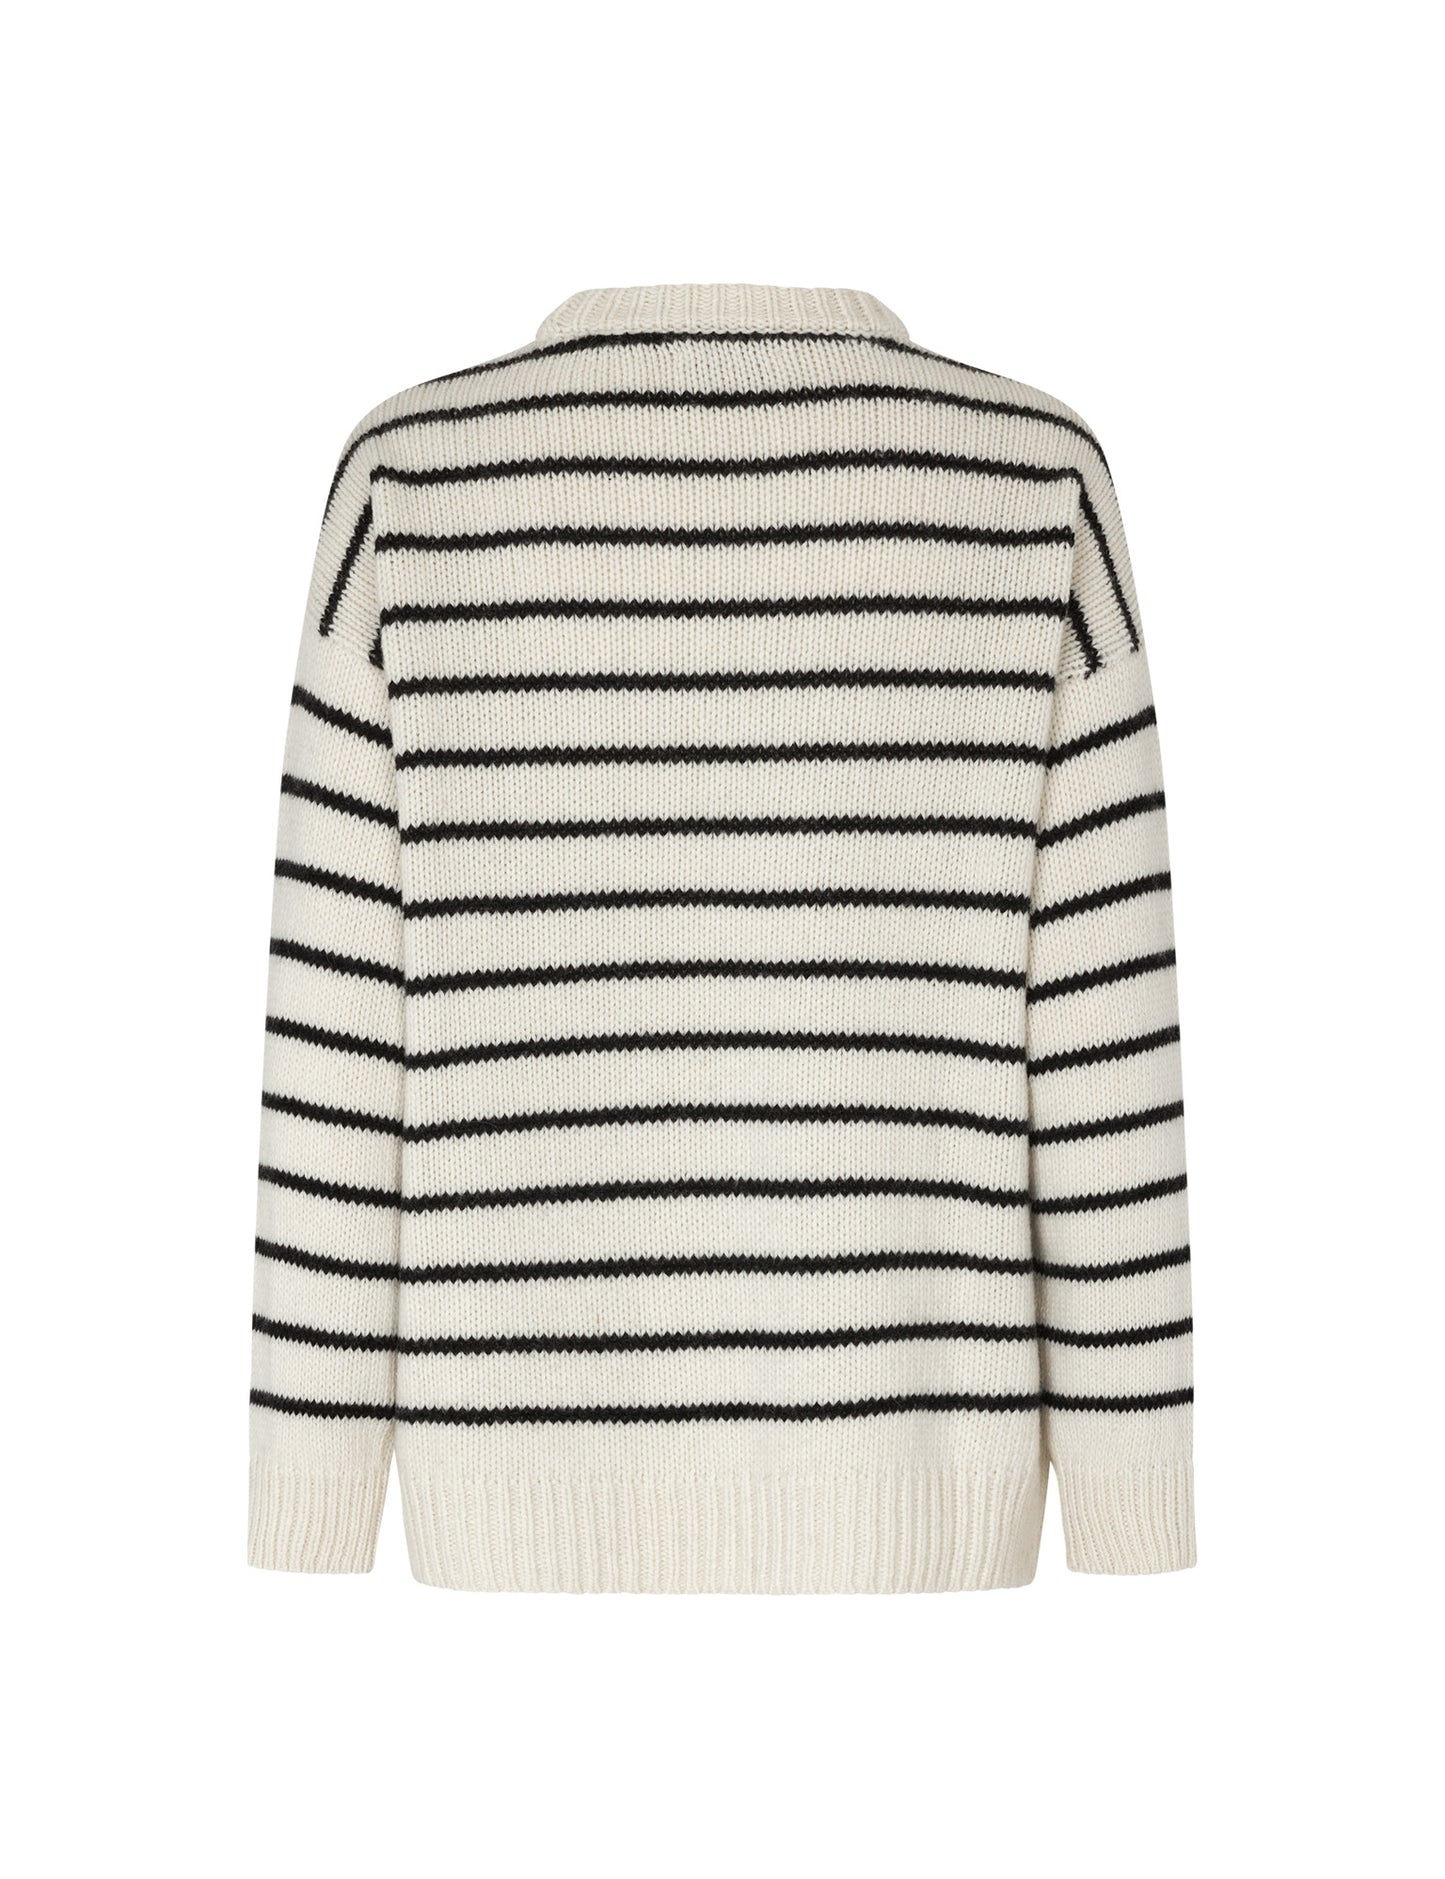 Recycled Iceland Lefty Sweater, Black/Winter White